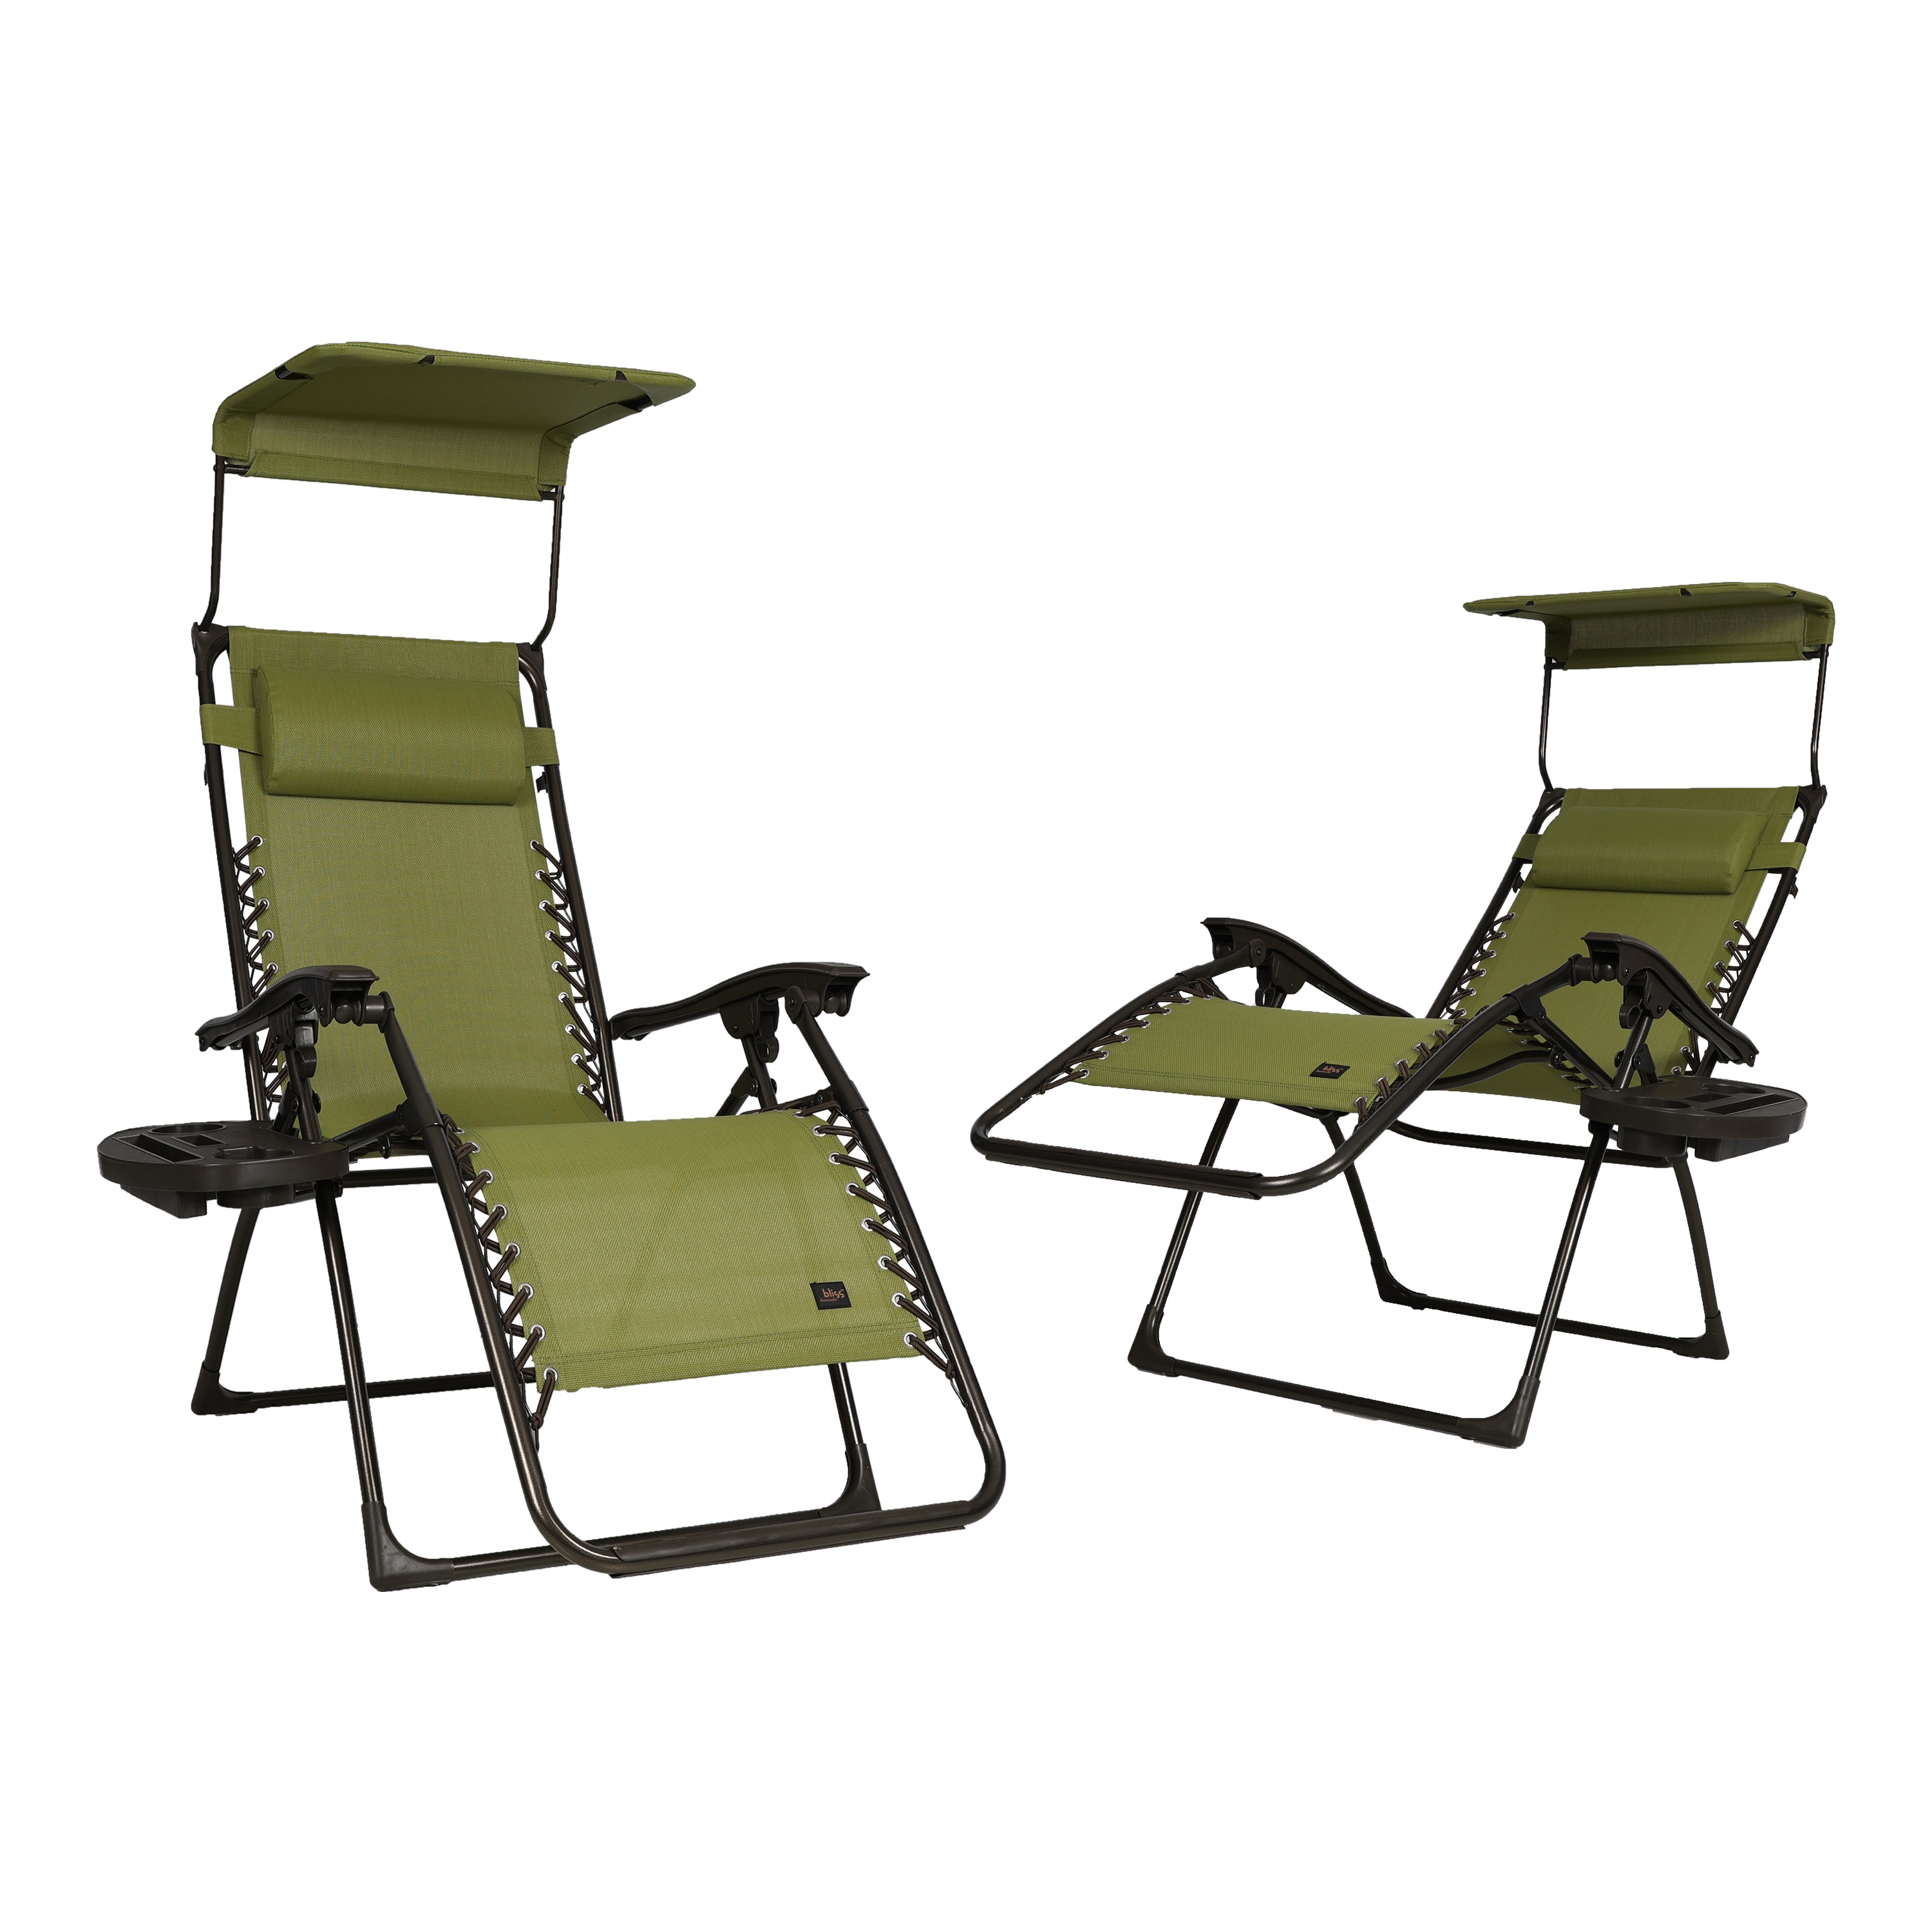 Cesicia Metal Rattan Outdoor Rocking Chair Recliner Chair with Olive Green Cushion for Living Room, Patio, Garden (Set of 2)